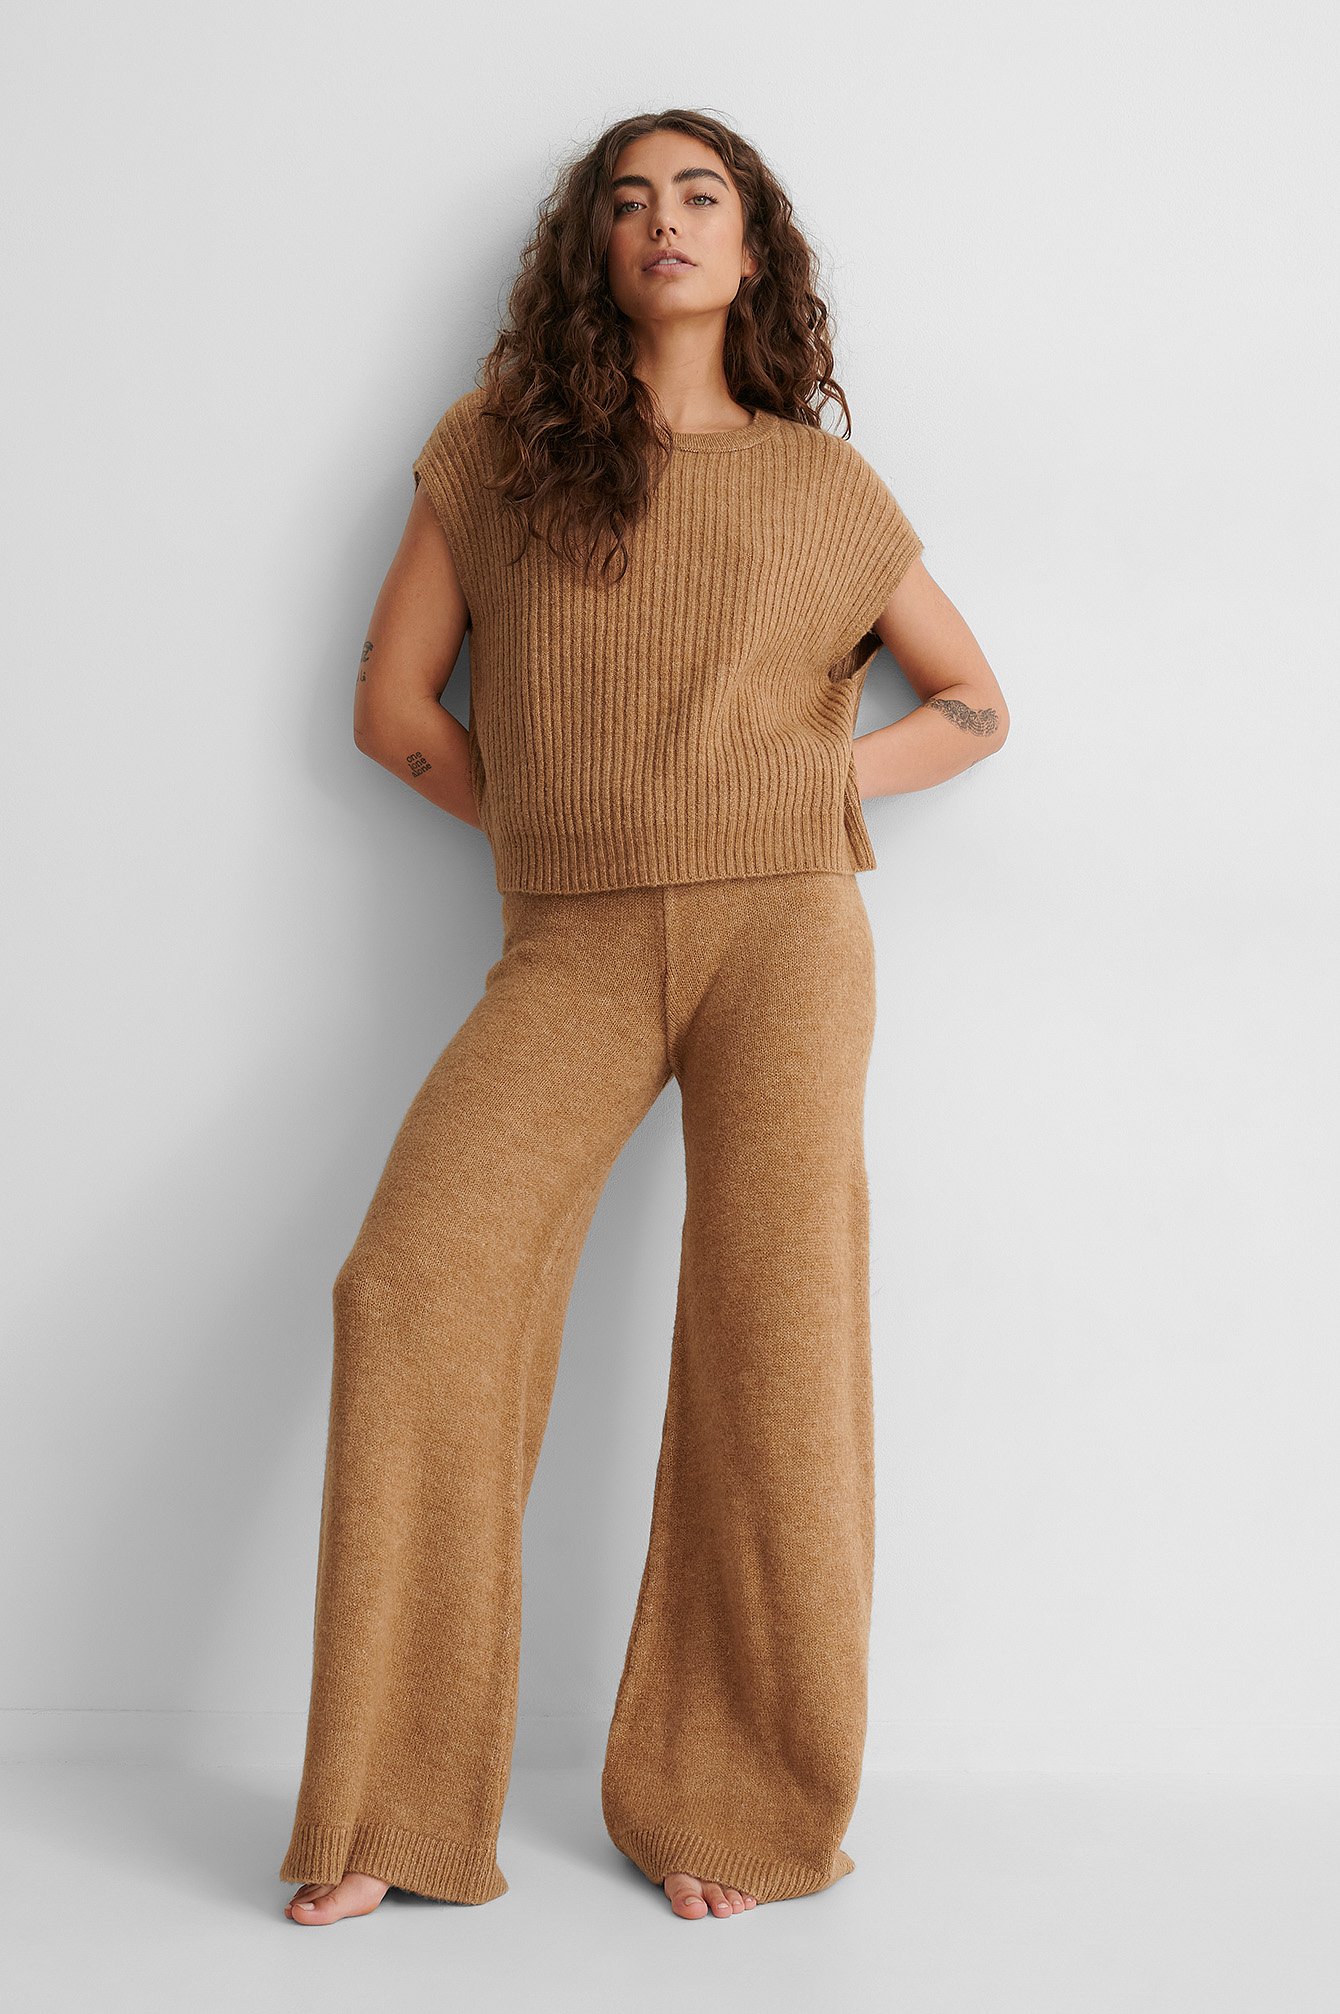 Wide Leg Knitted Trousers Outfit.